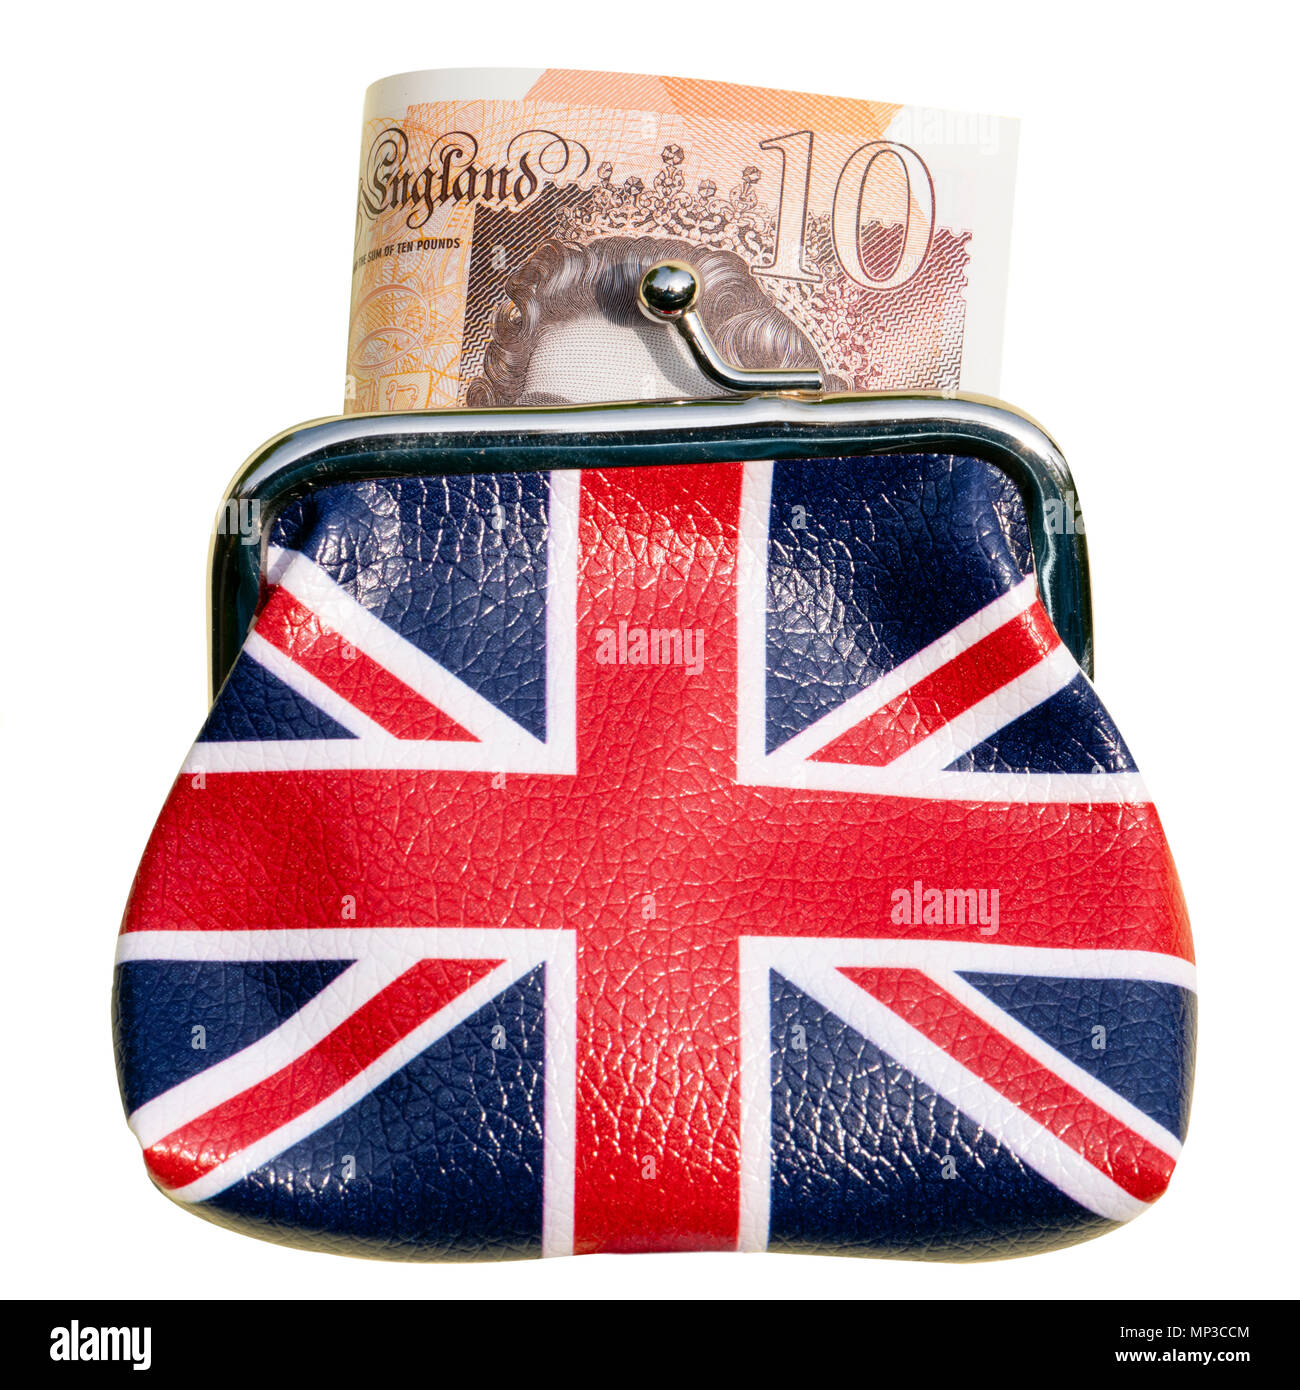 Union Jack coin purse with a £10 note, isolated or cut out on a white background. Stock Photo